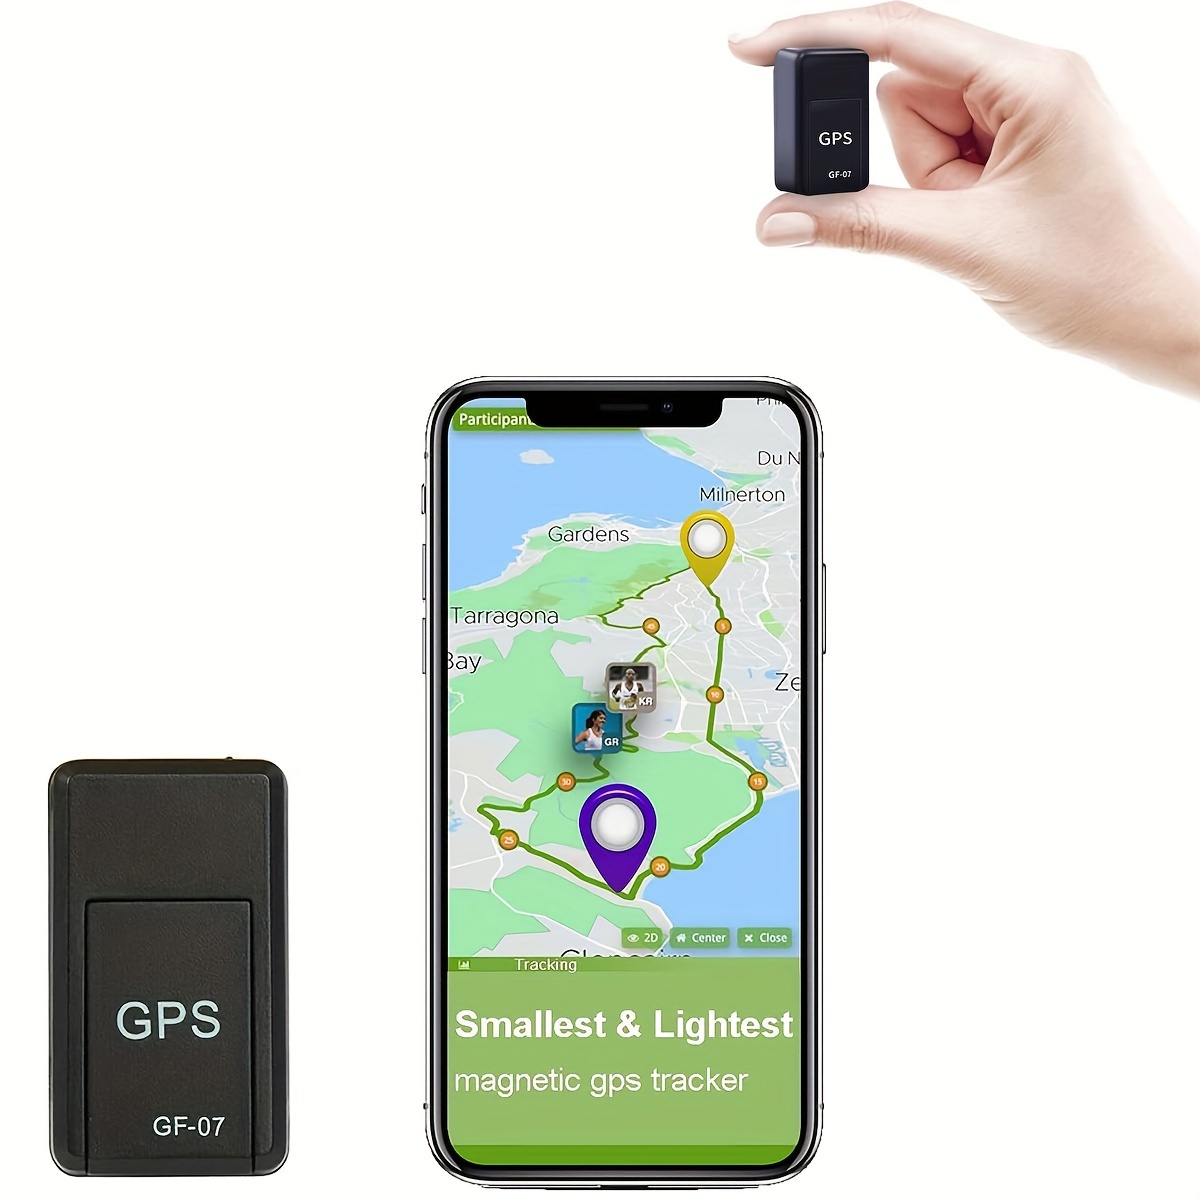 Is There A GPS Tracker Without A SIM Card?